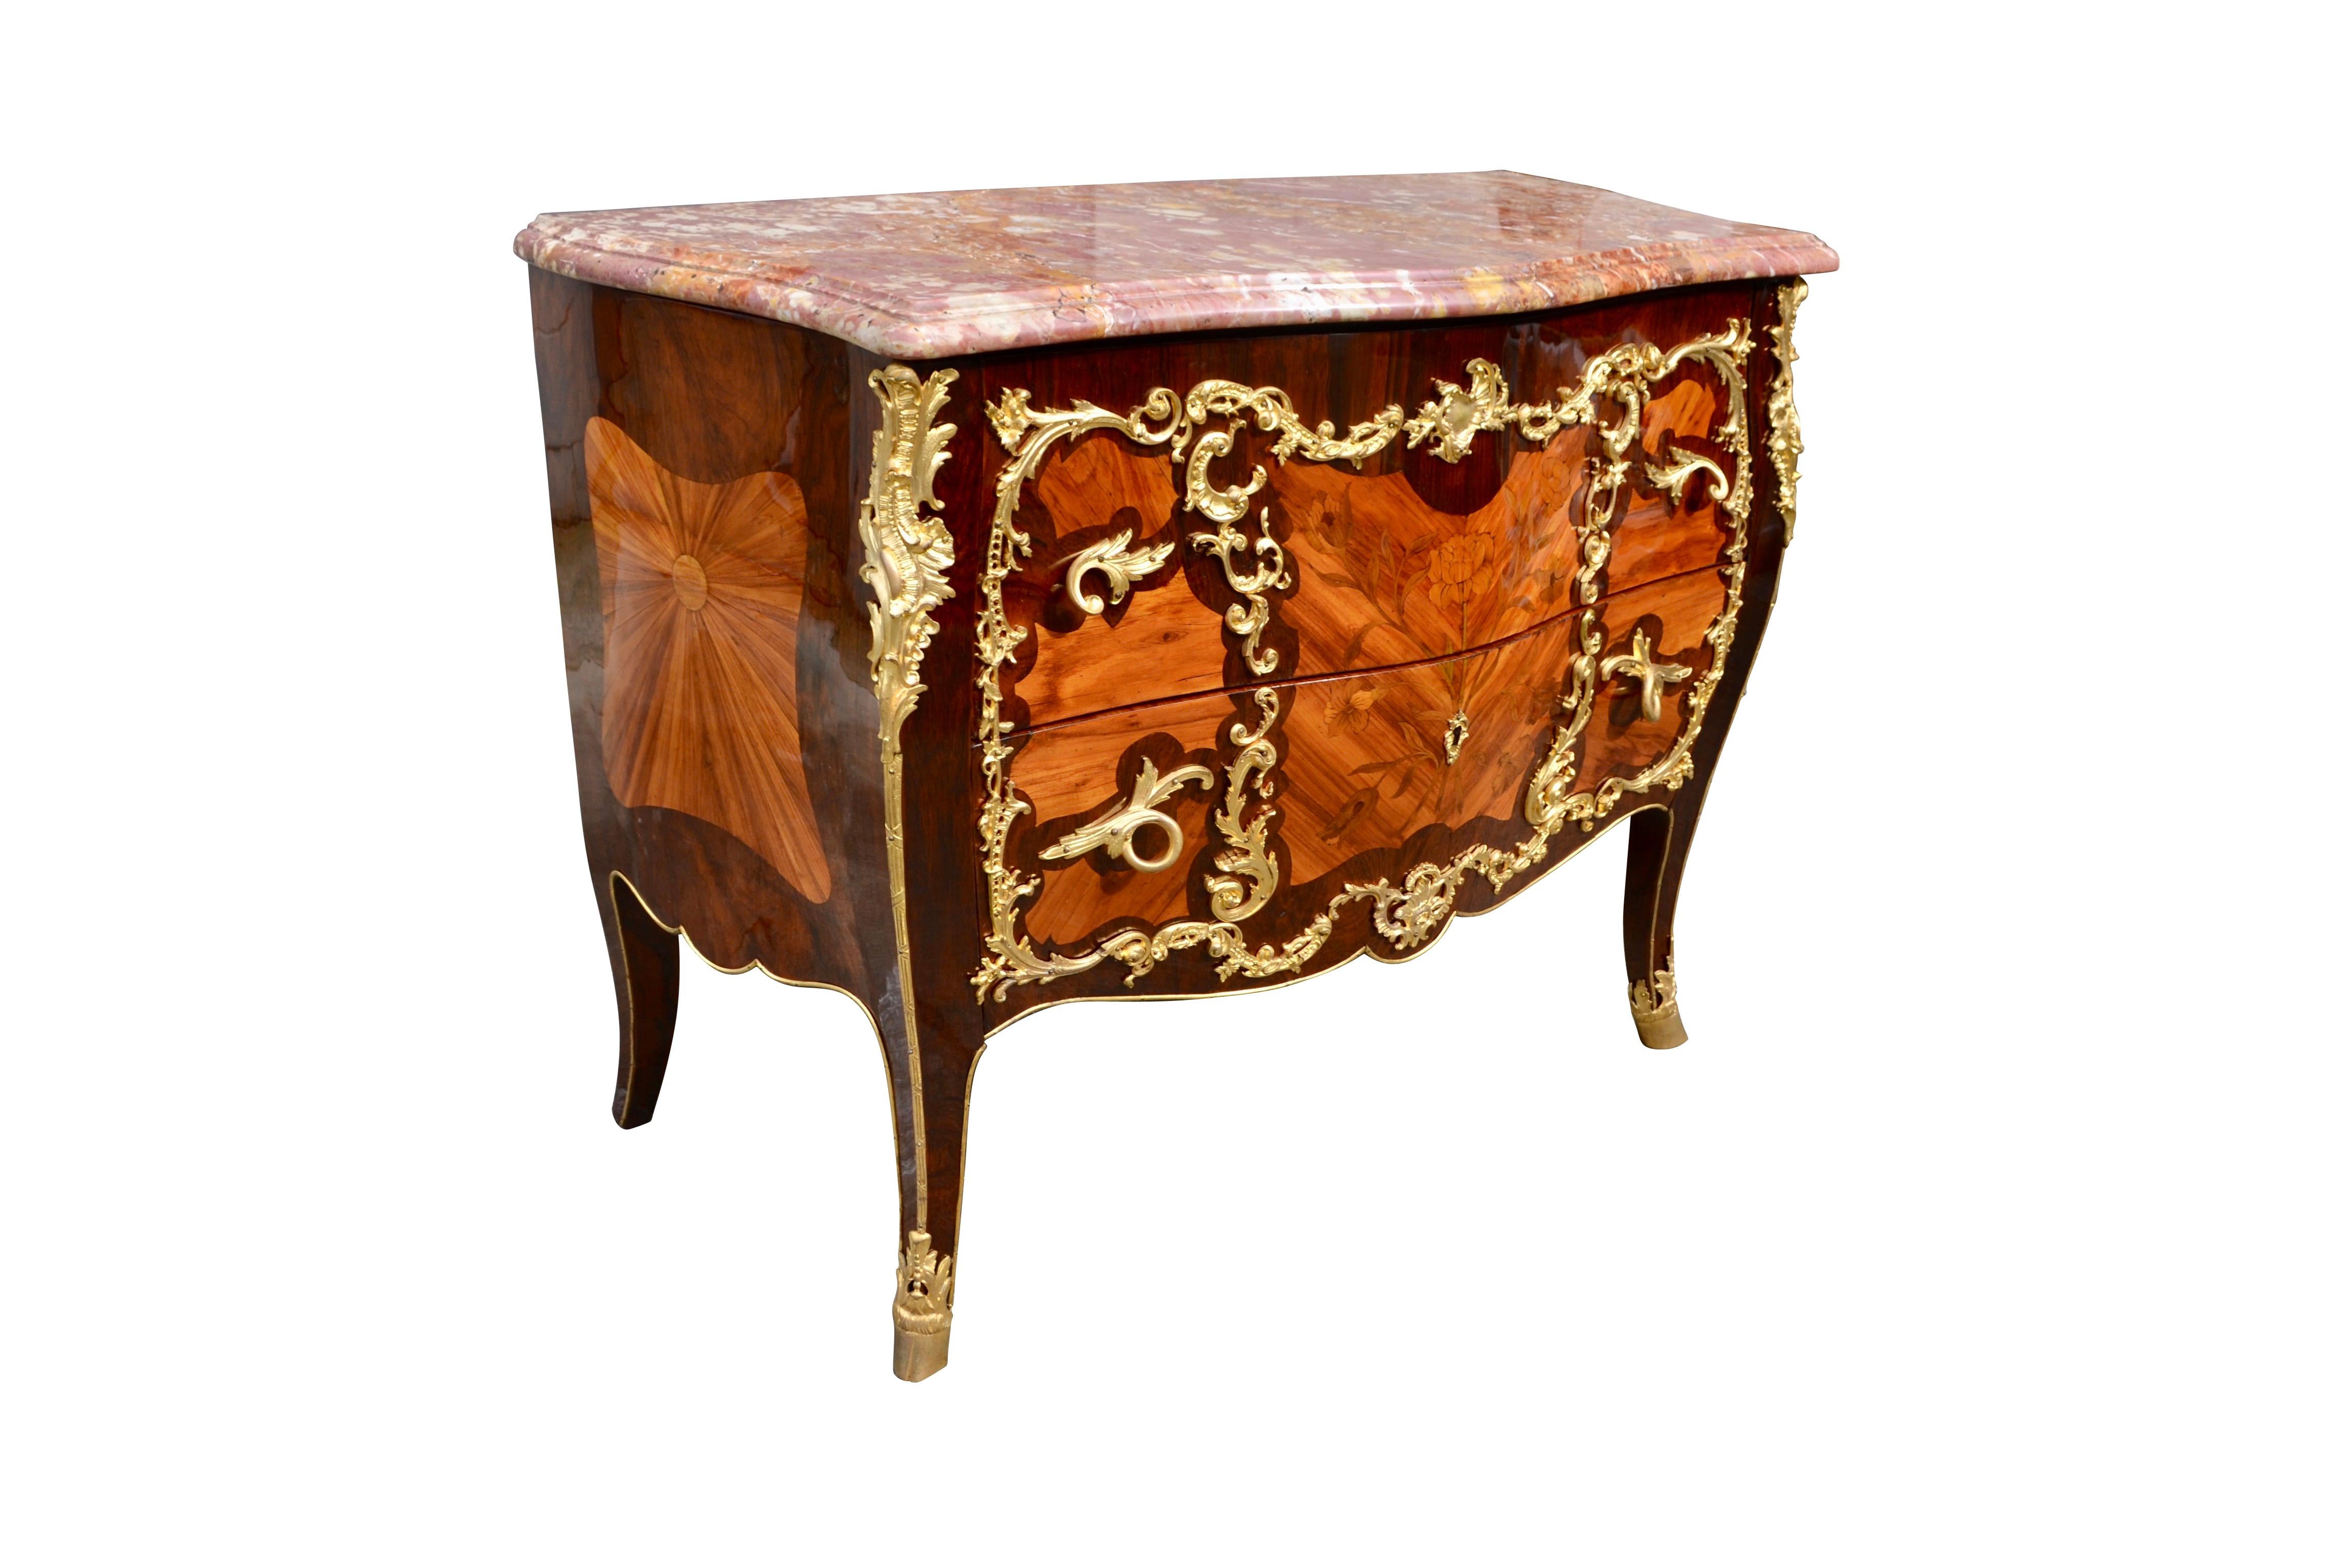 19th Century French Louis XV Style Marquetry and Ormolu Bombe Chest of Drawers In Good Condition For Sale In Vancouver, British Columbia